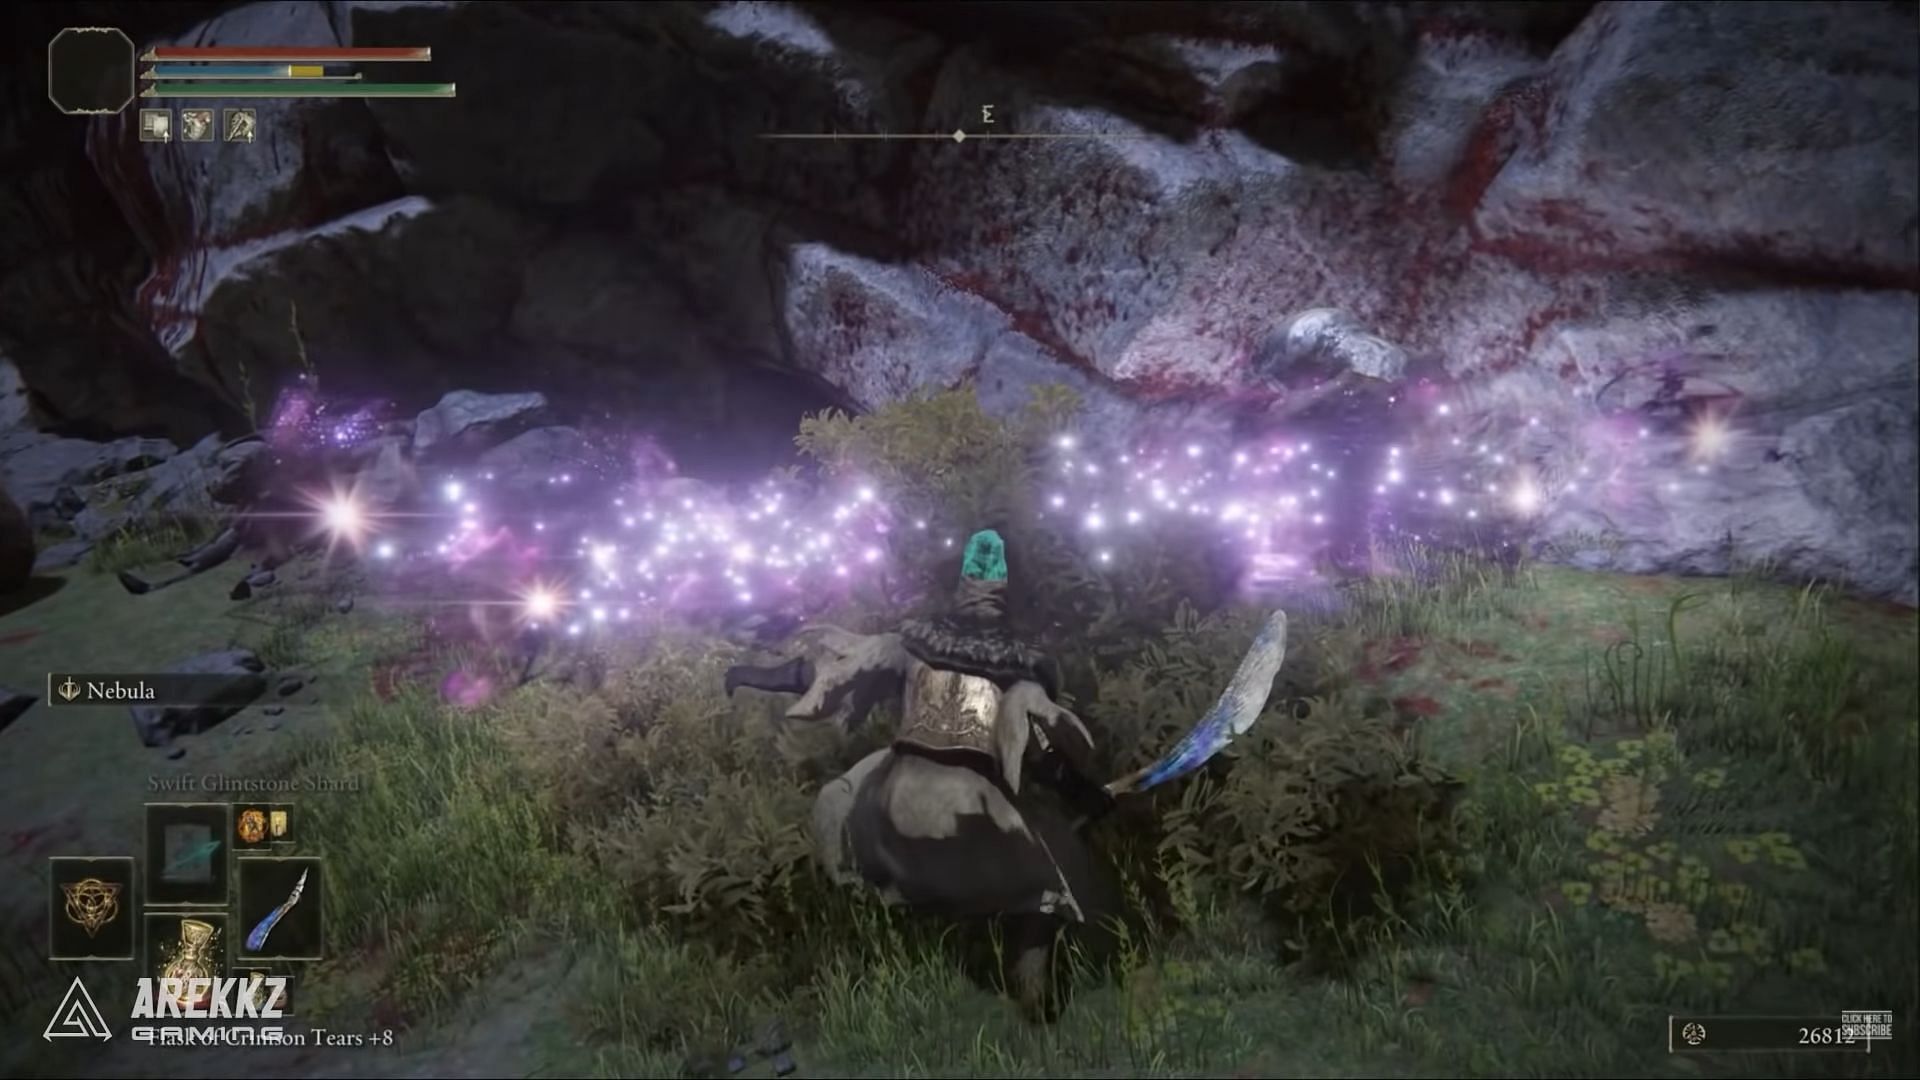 Wing of Astel is a powerful weapon that can melt through all forms of bosses within Elden Ring (Image via Arekkz Gaming/YouTube)